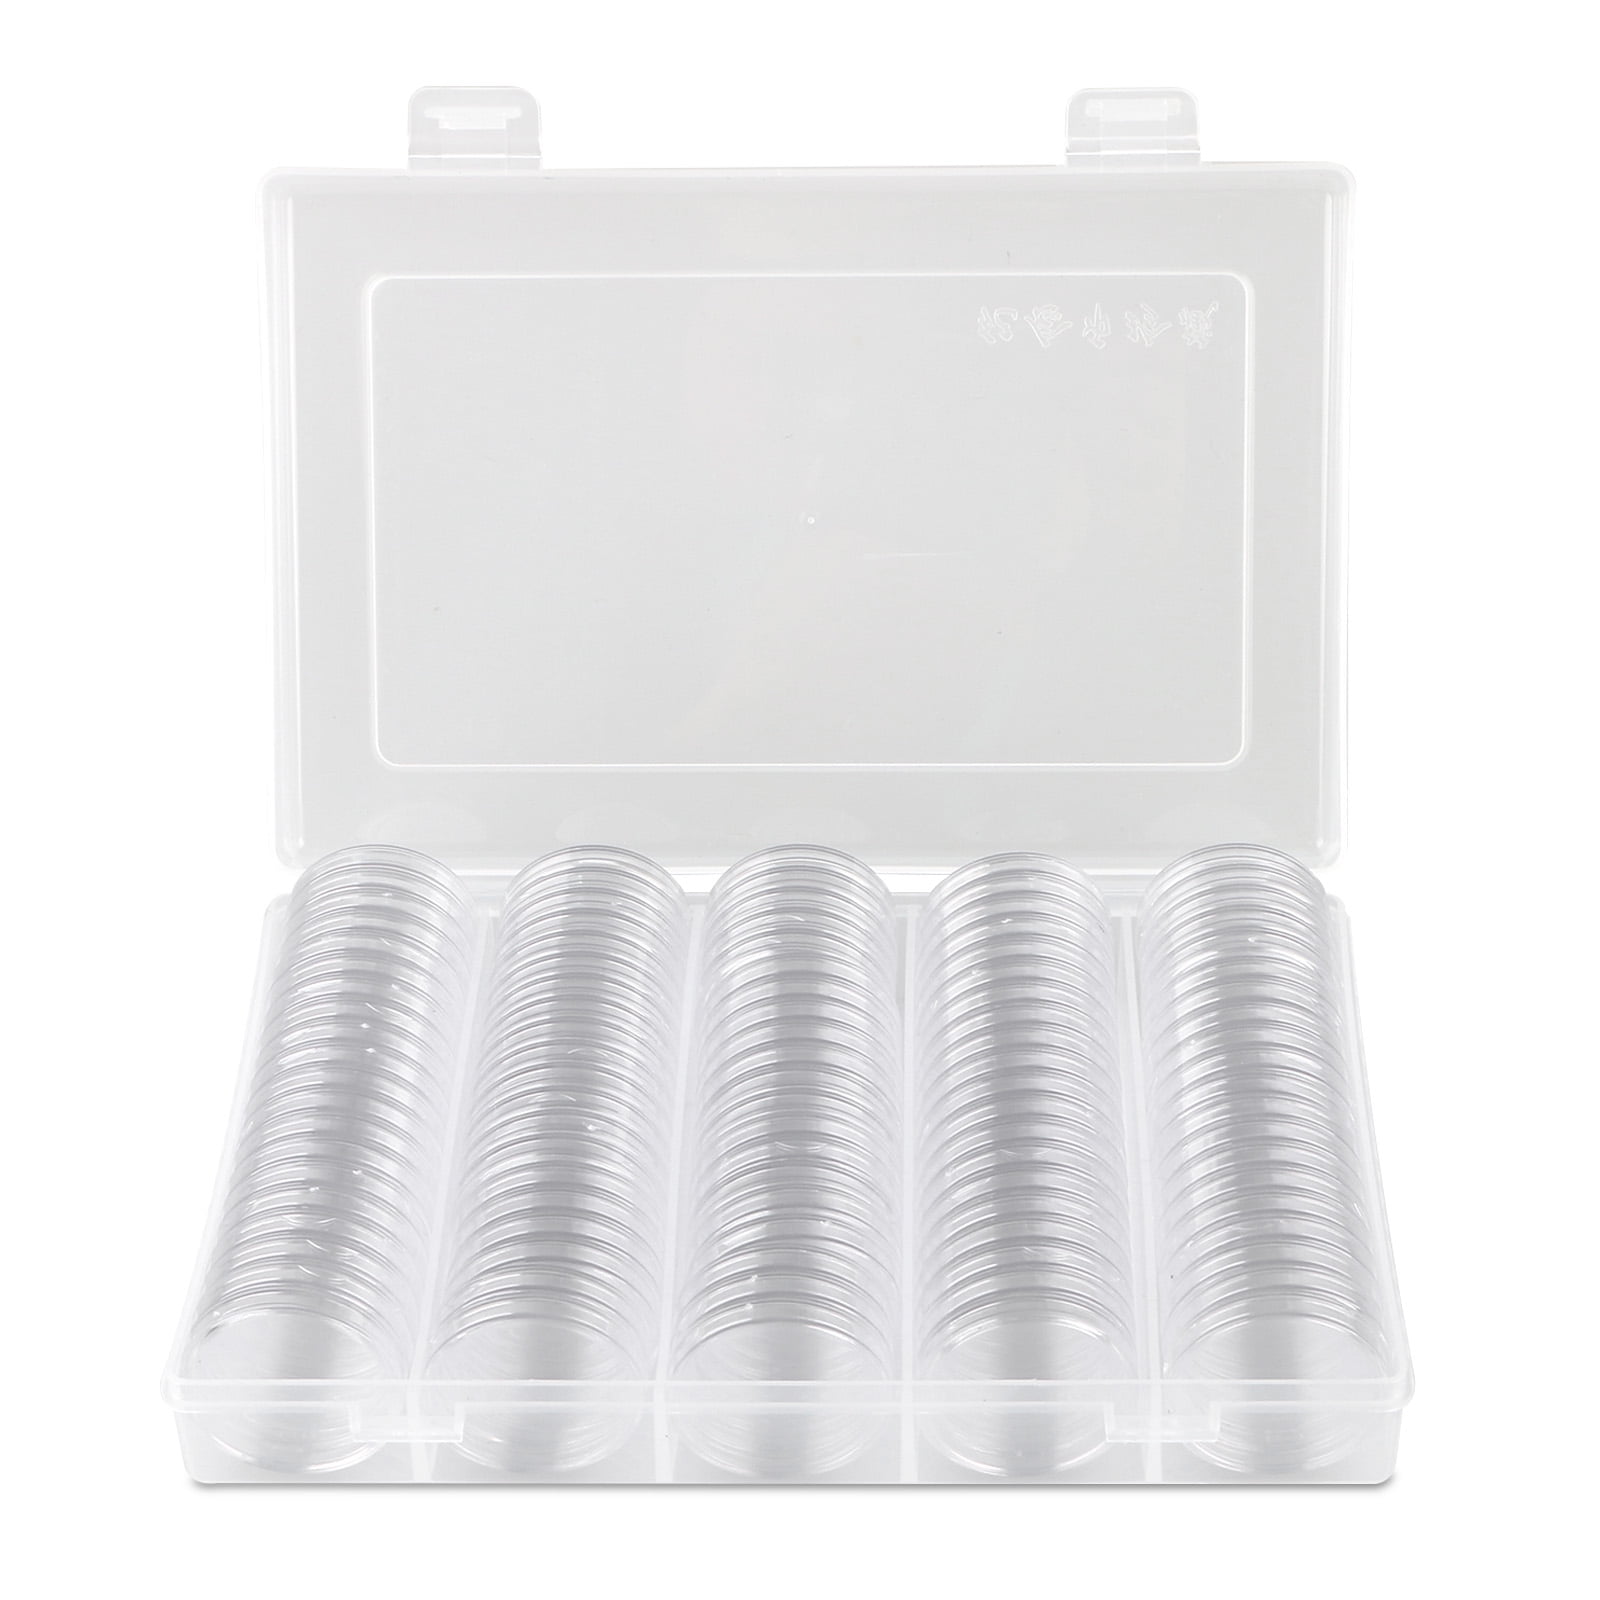 10x Clear Round Plastic Cases Coin Storage Capsules Holder Small 30mm In CA 